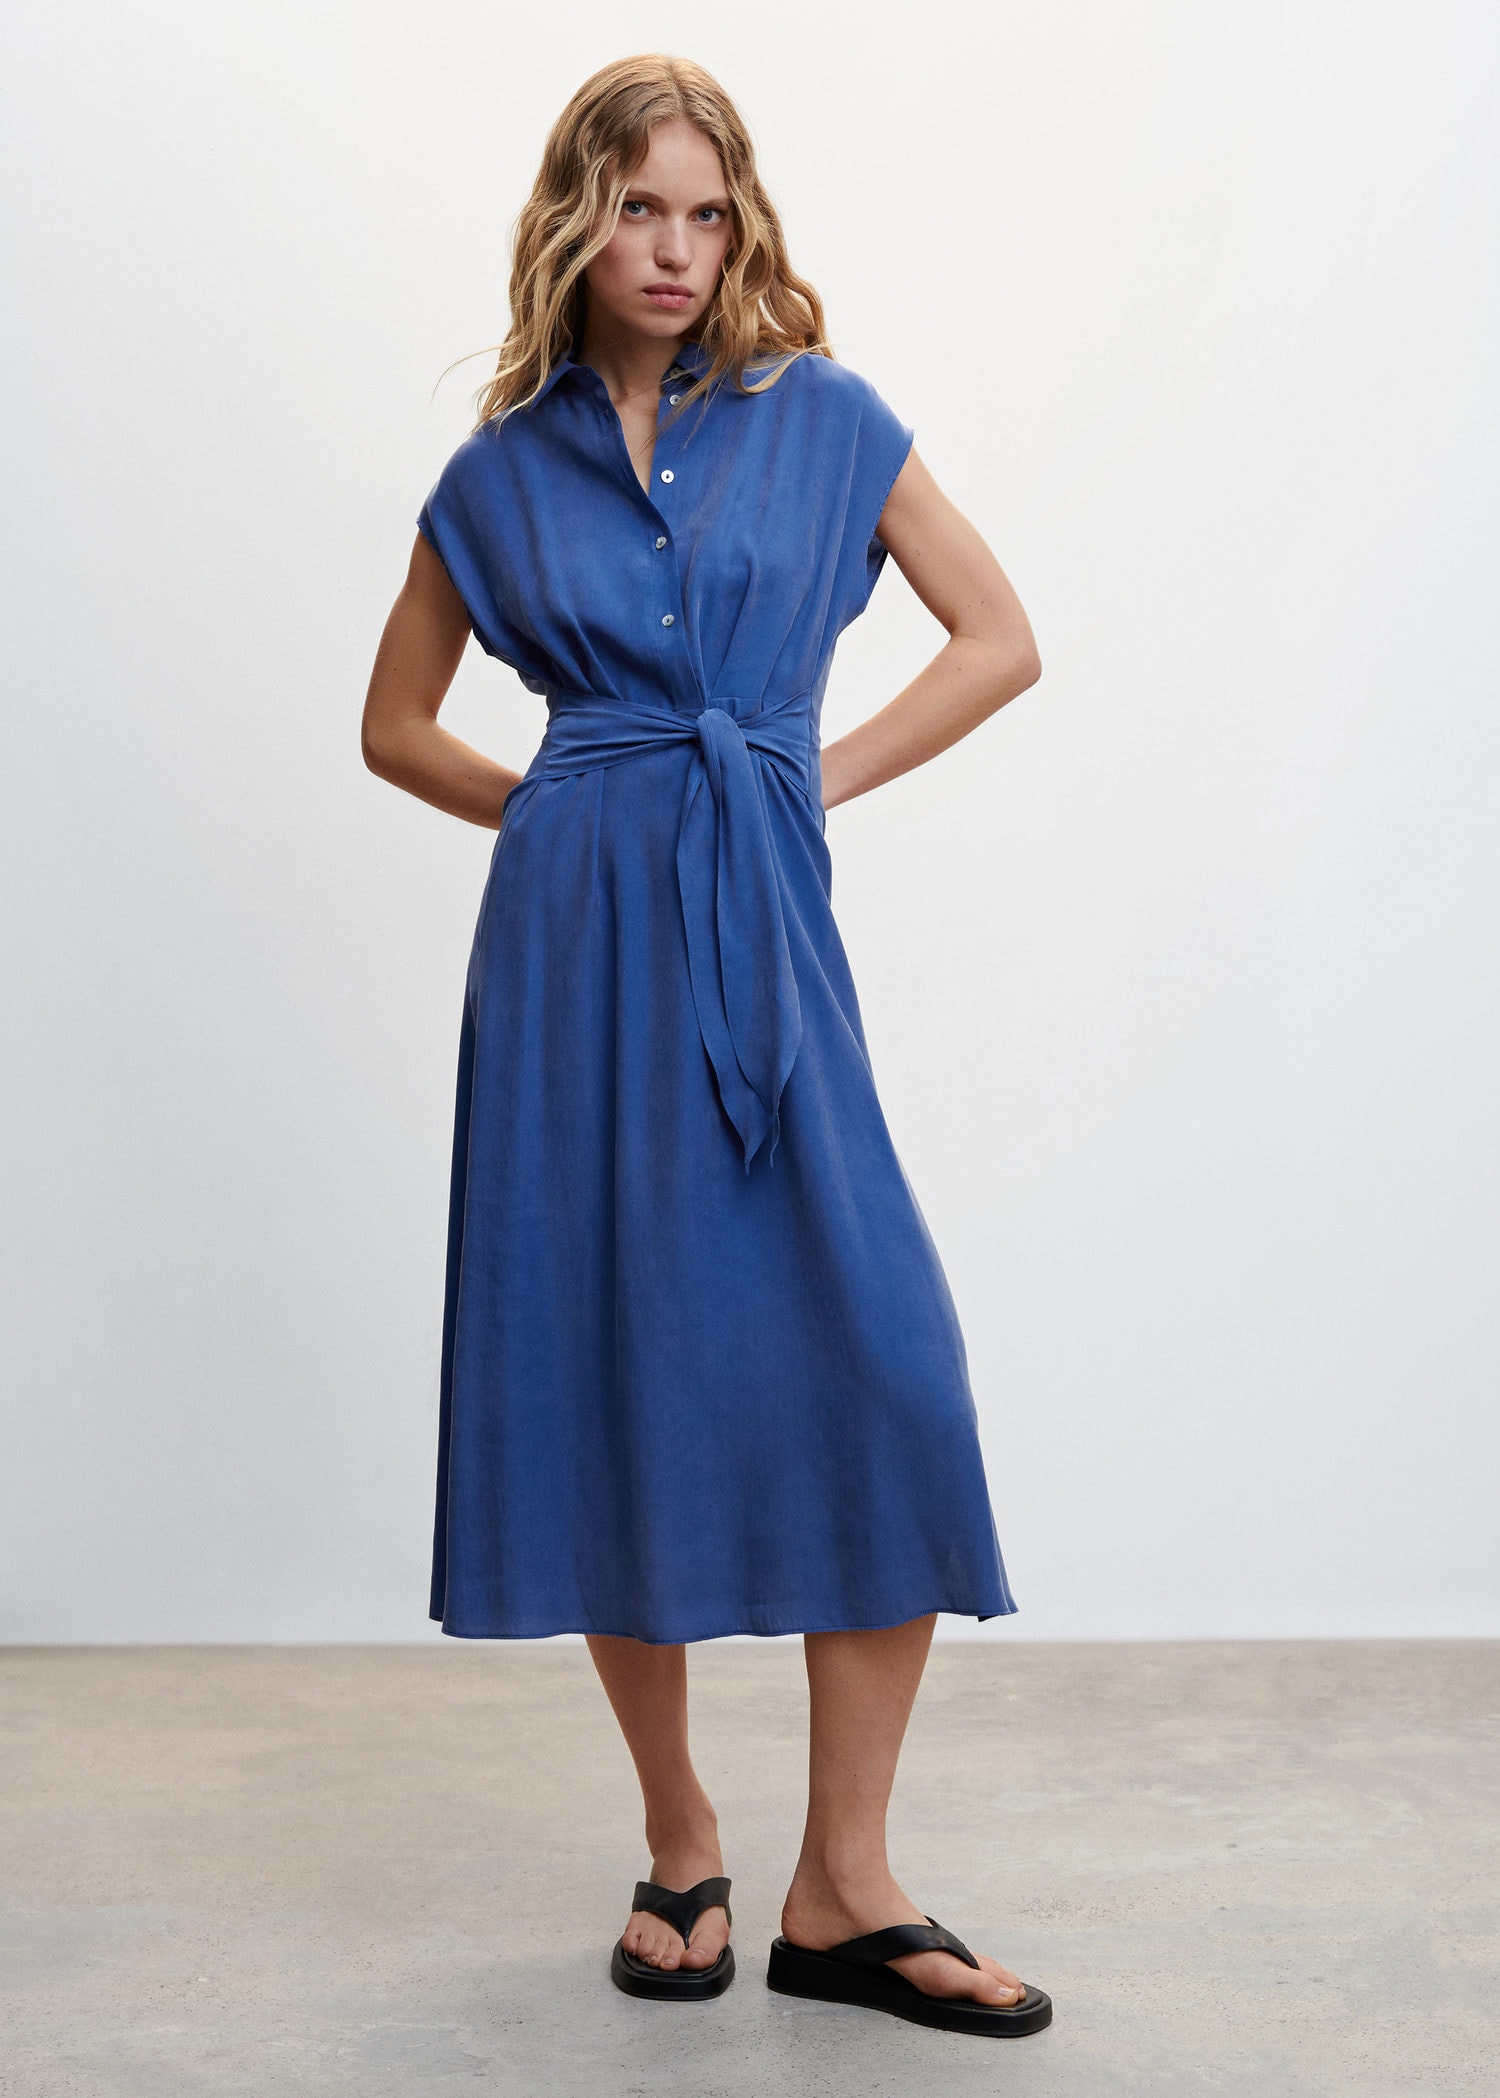 Shop for Mango | Going Out Dresses | Dresses | Womens | online at Freemans